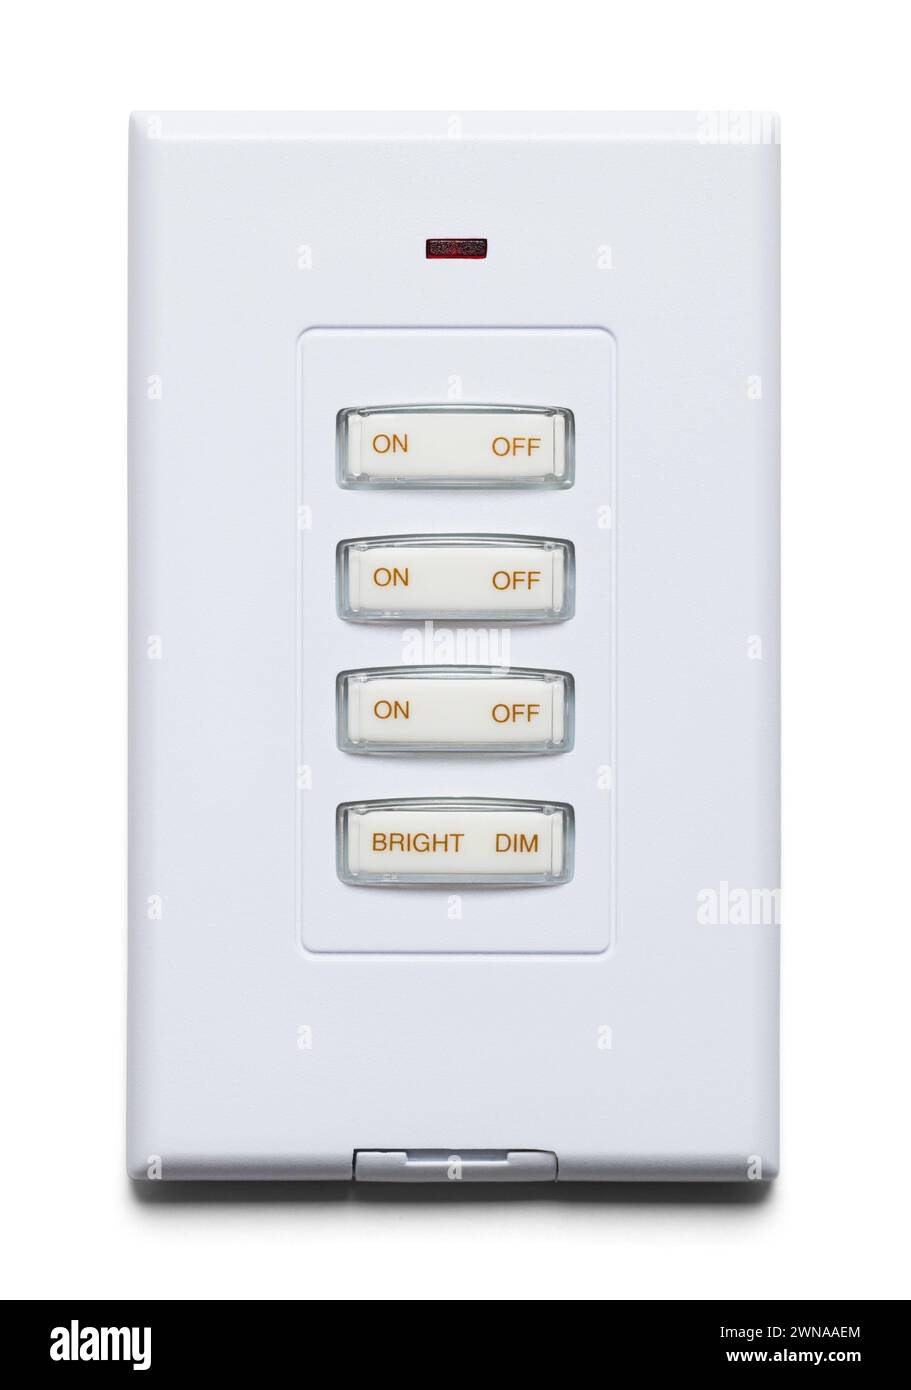 Button Light Switch Cut Out on White. Stock Photo